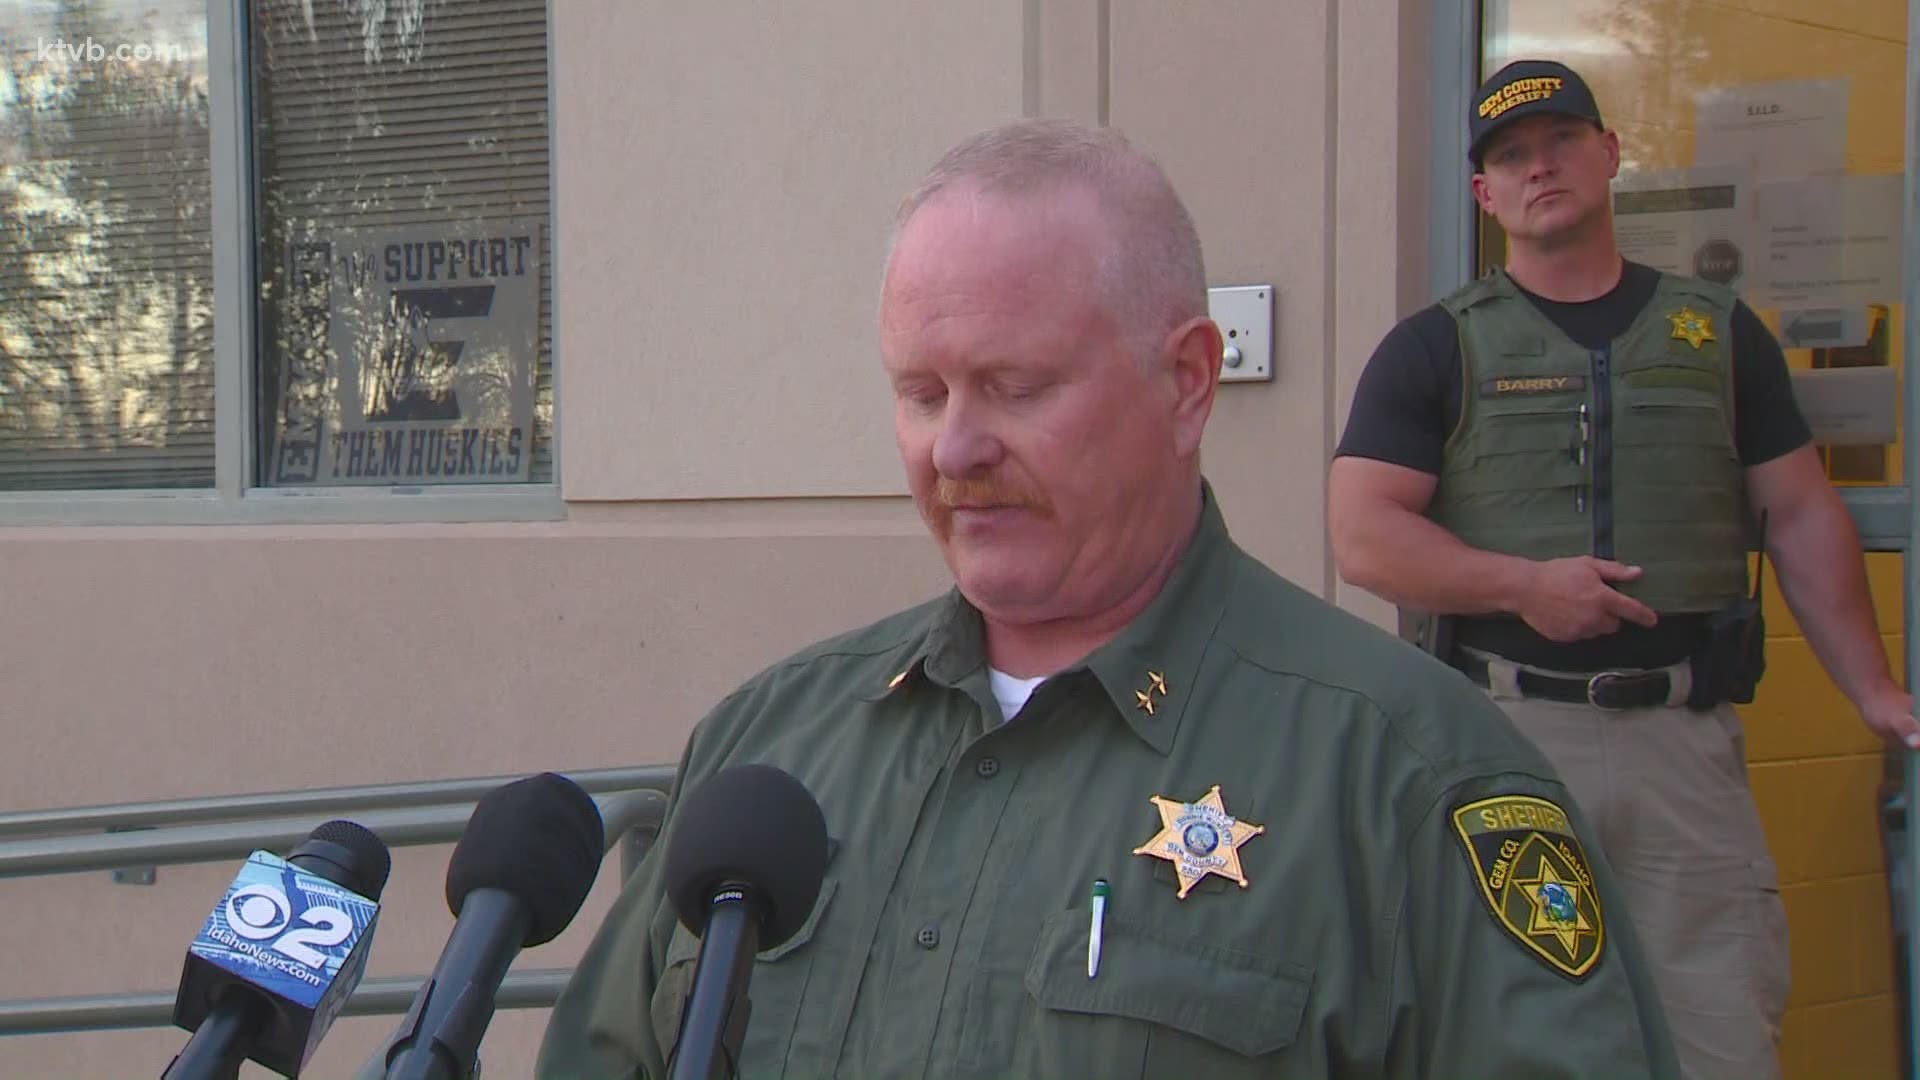 Sheriff Donne Wunder said while the body hasn't been identified, they believe it is like the body of Taryn Summers.